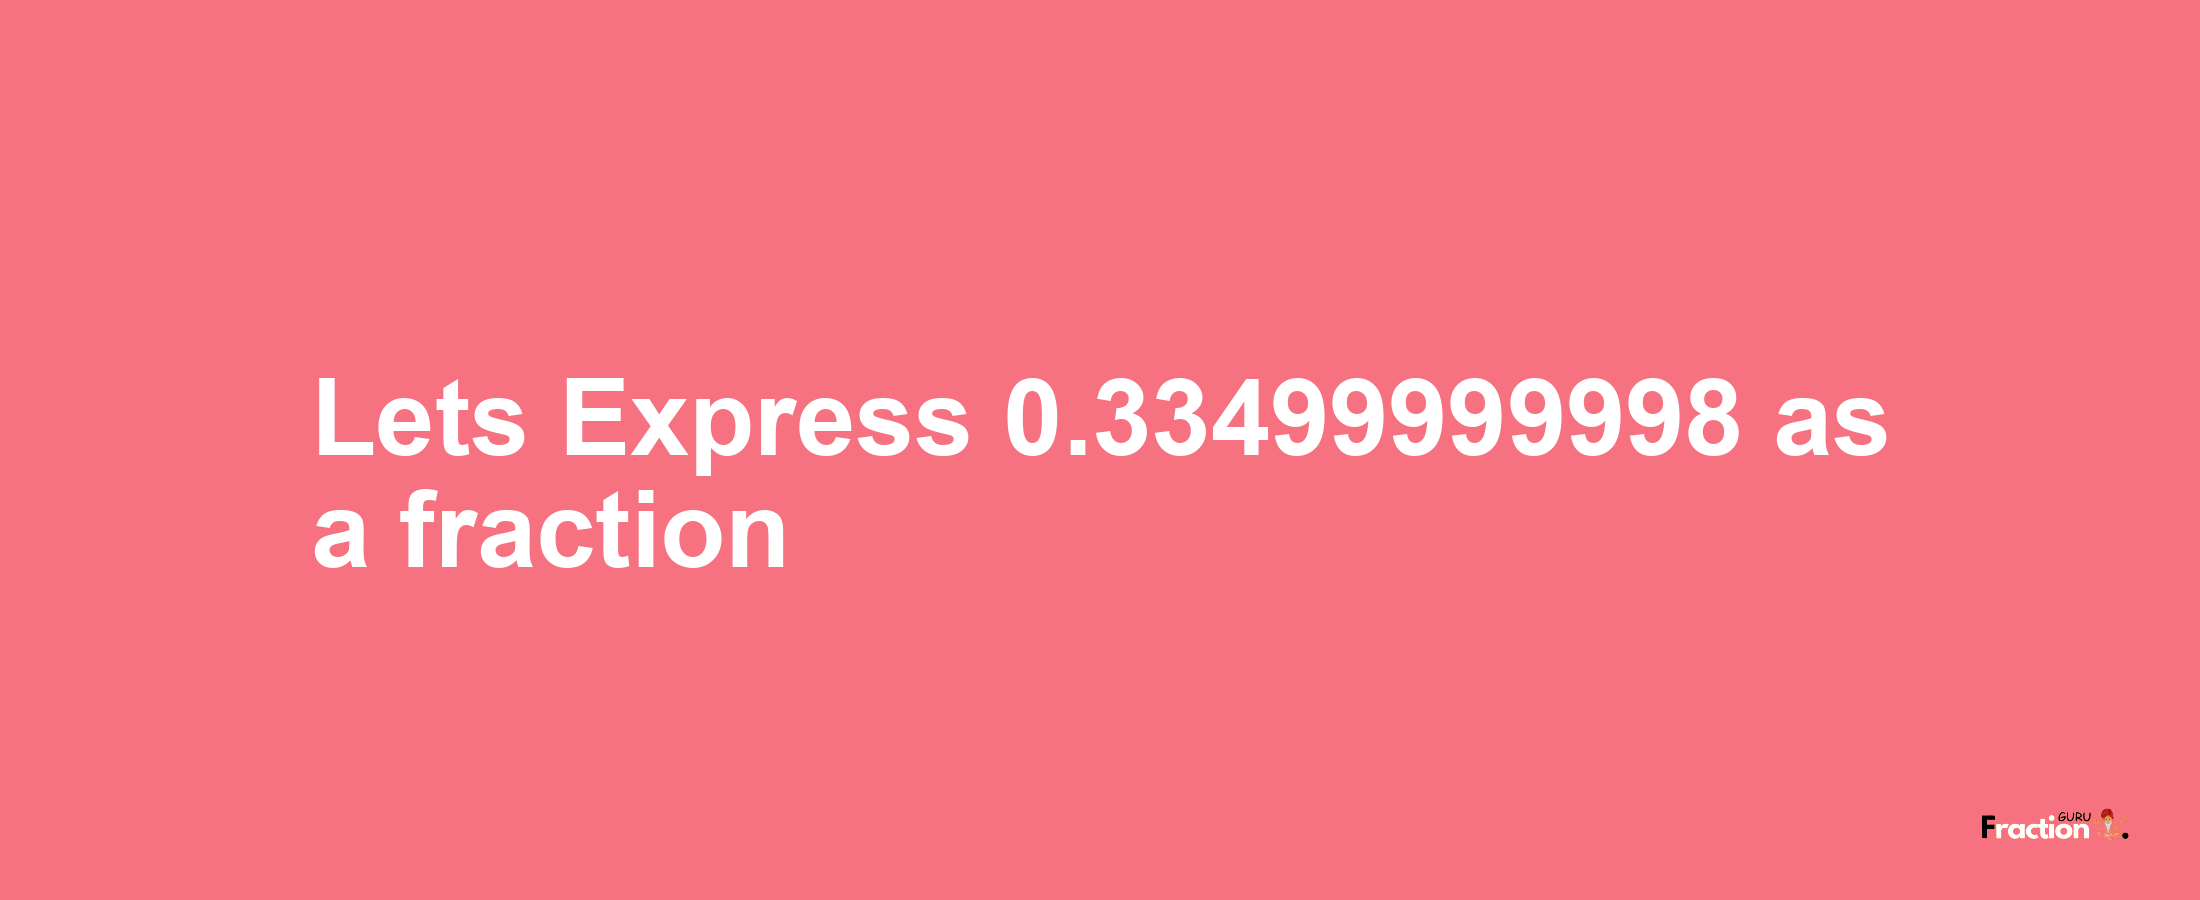 Lets Express 0.33499999998 as afraction